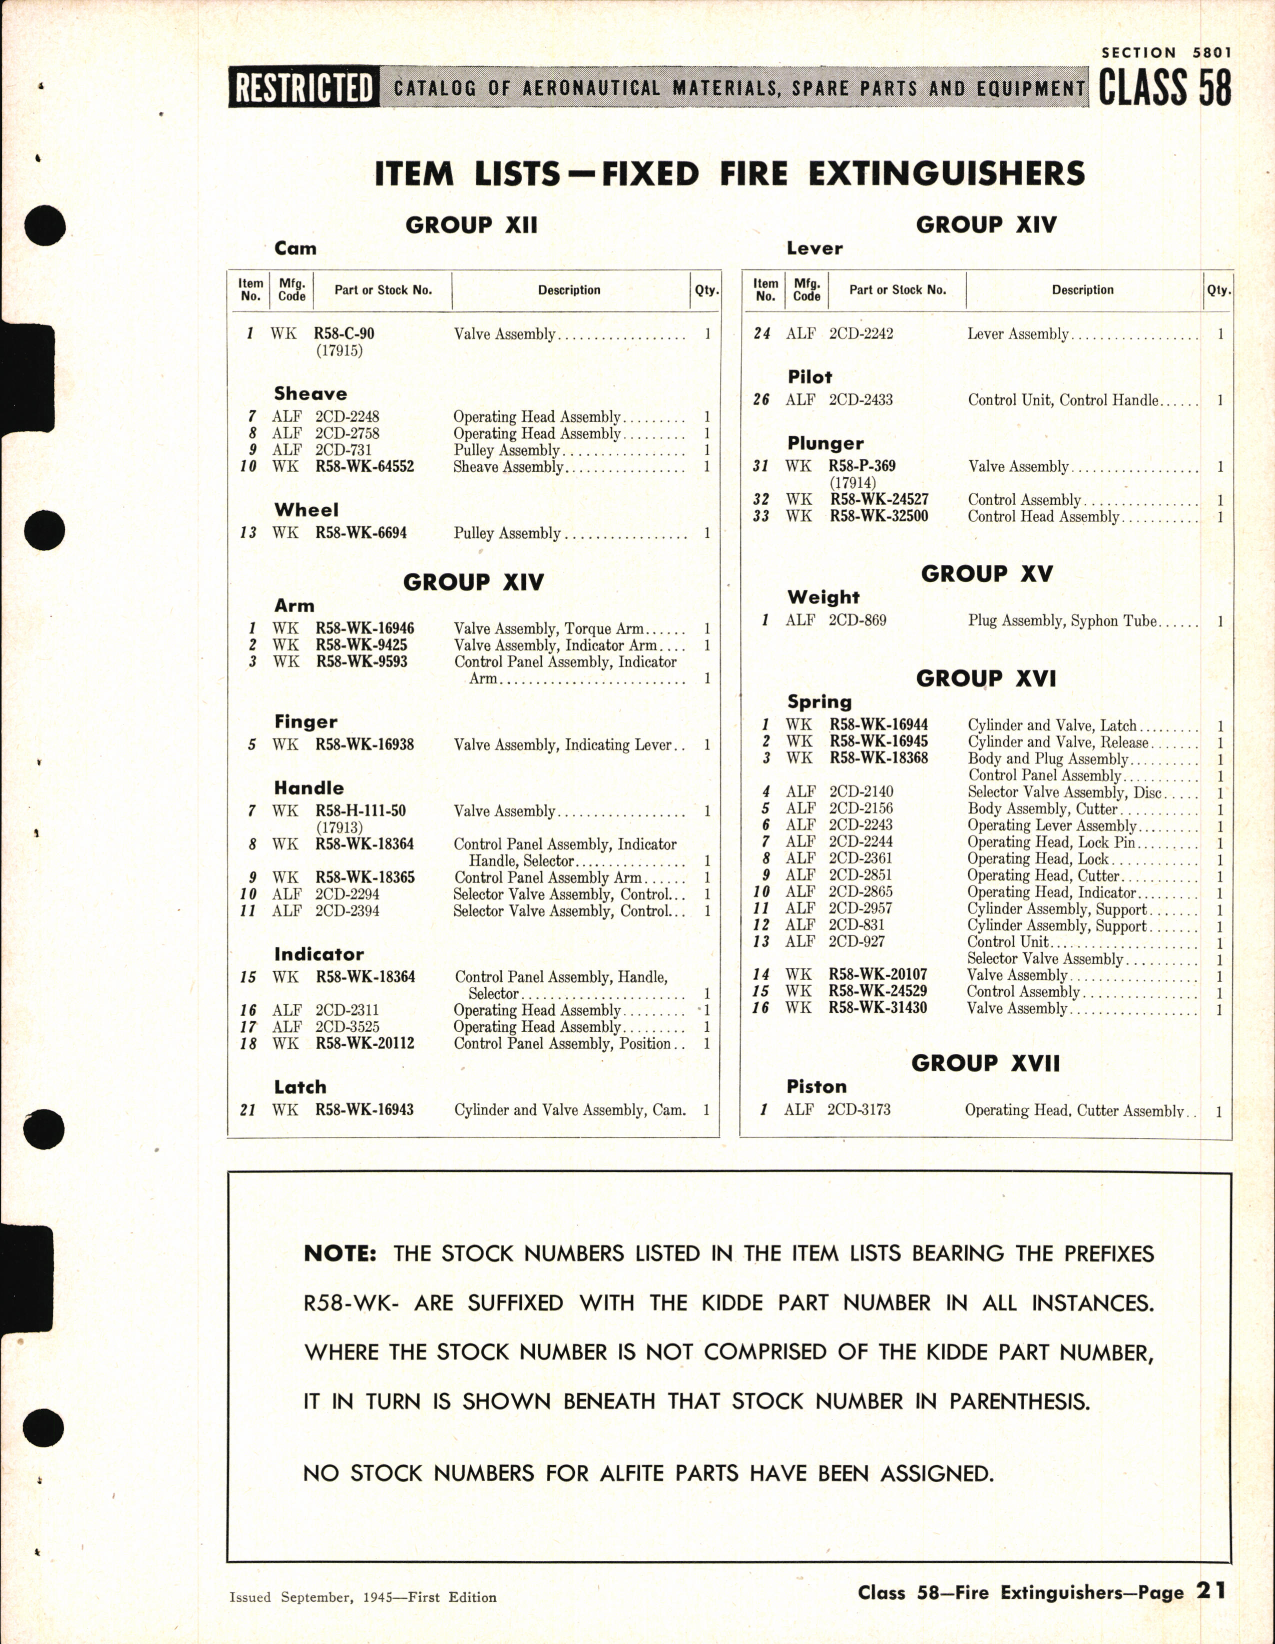 Sample page 21 from AirCorps Library document: Fire Extinguishers and Parts